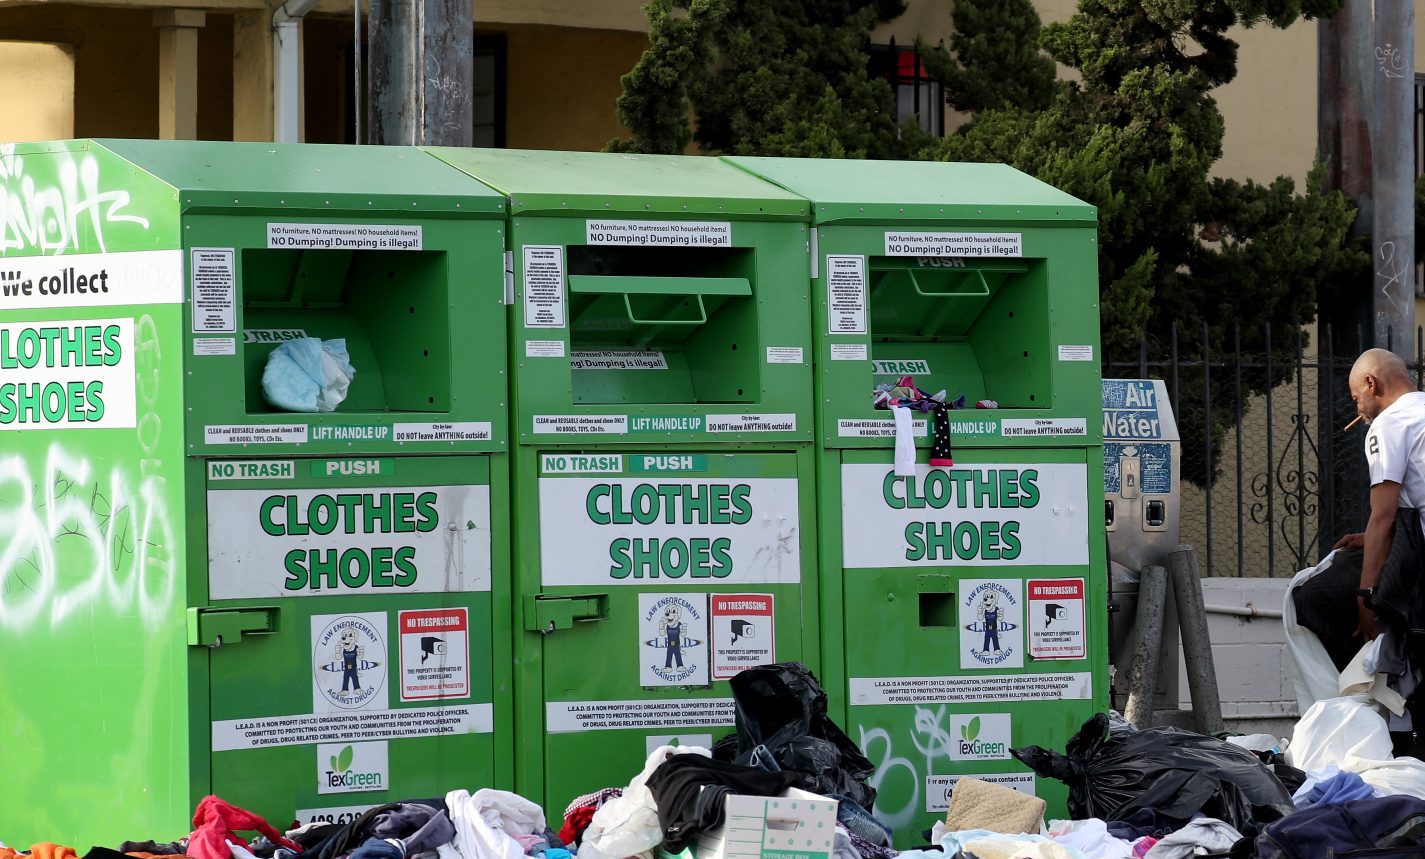 Woman, 61, Dies After She’s Swallowed By Clothing Donation Box In California